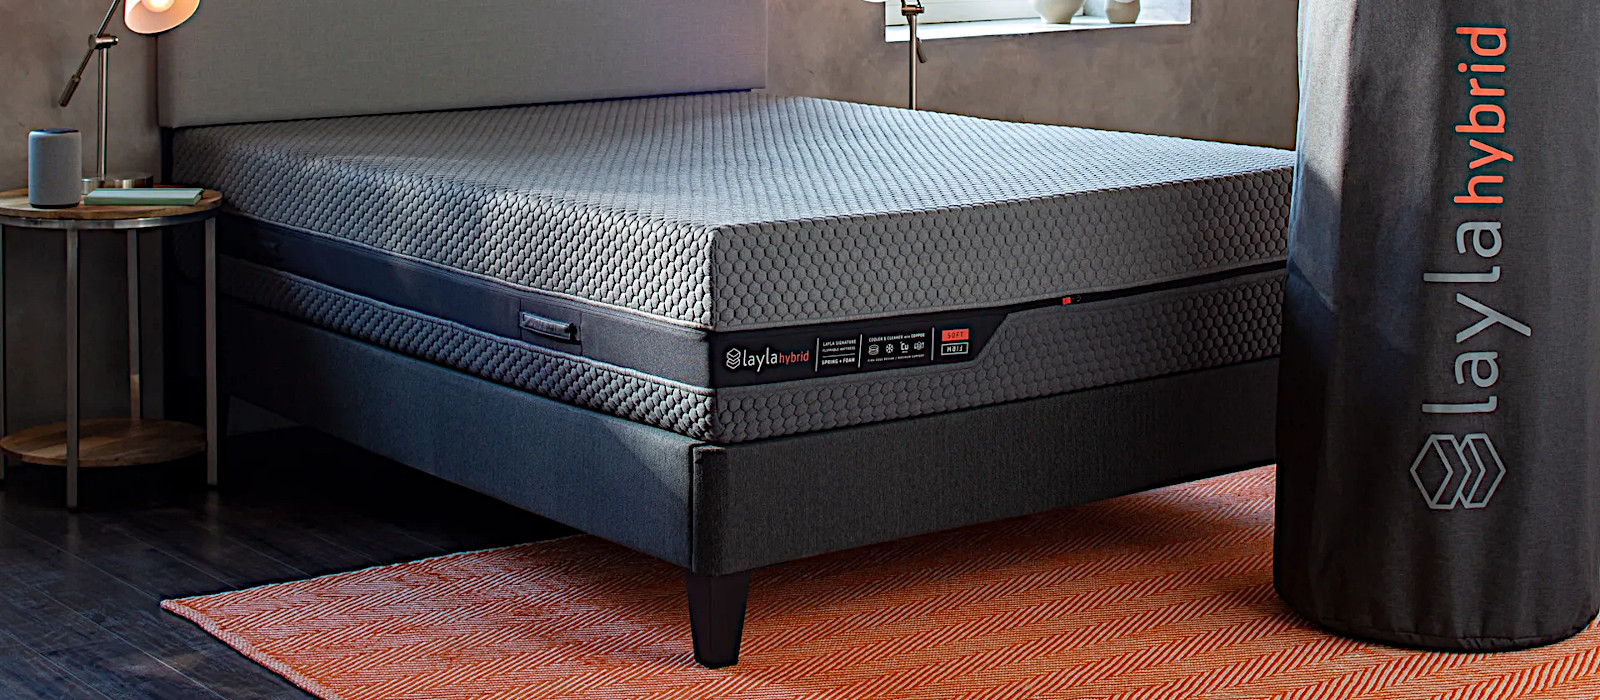 Discounted copper infused flippable hybrid mattress